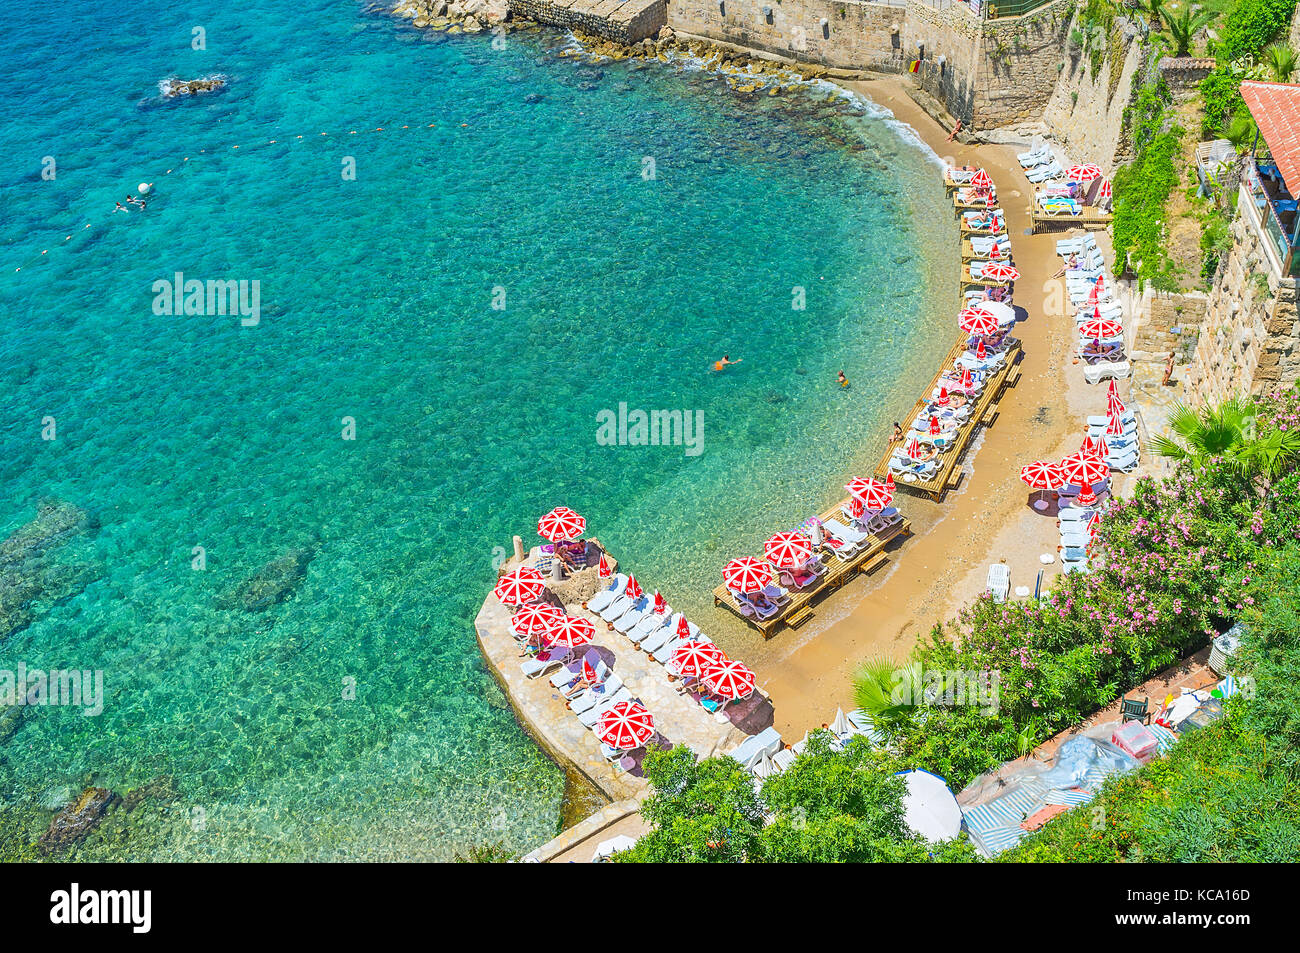 ANTALYA, TURKEY - MAY 12, 2017: Mermerli beach is the best place to relax on chaise-lounge and swim, it's located in historic Kaleici district next to Stock Photo